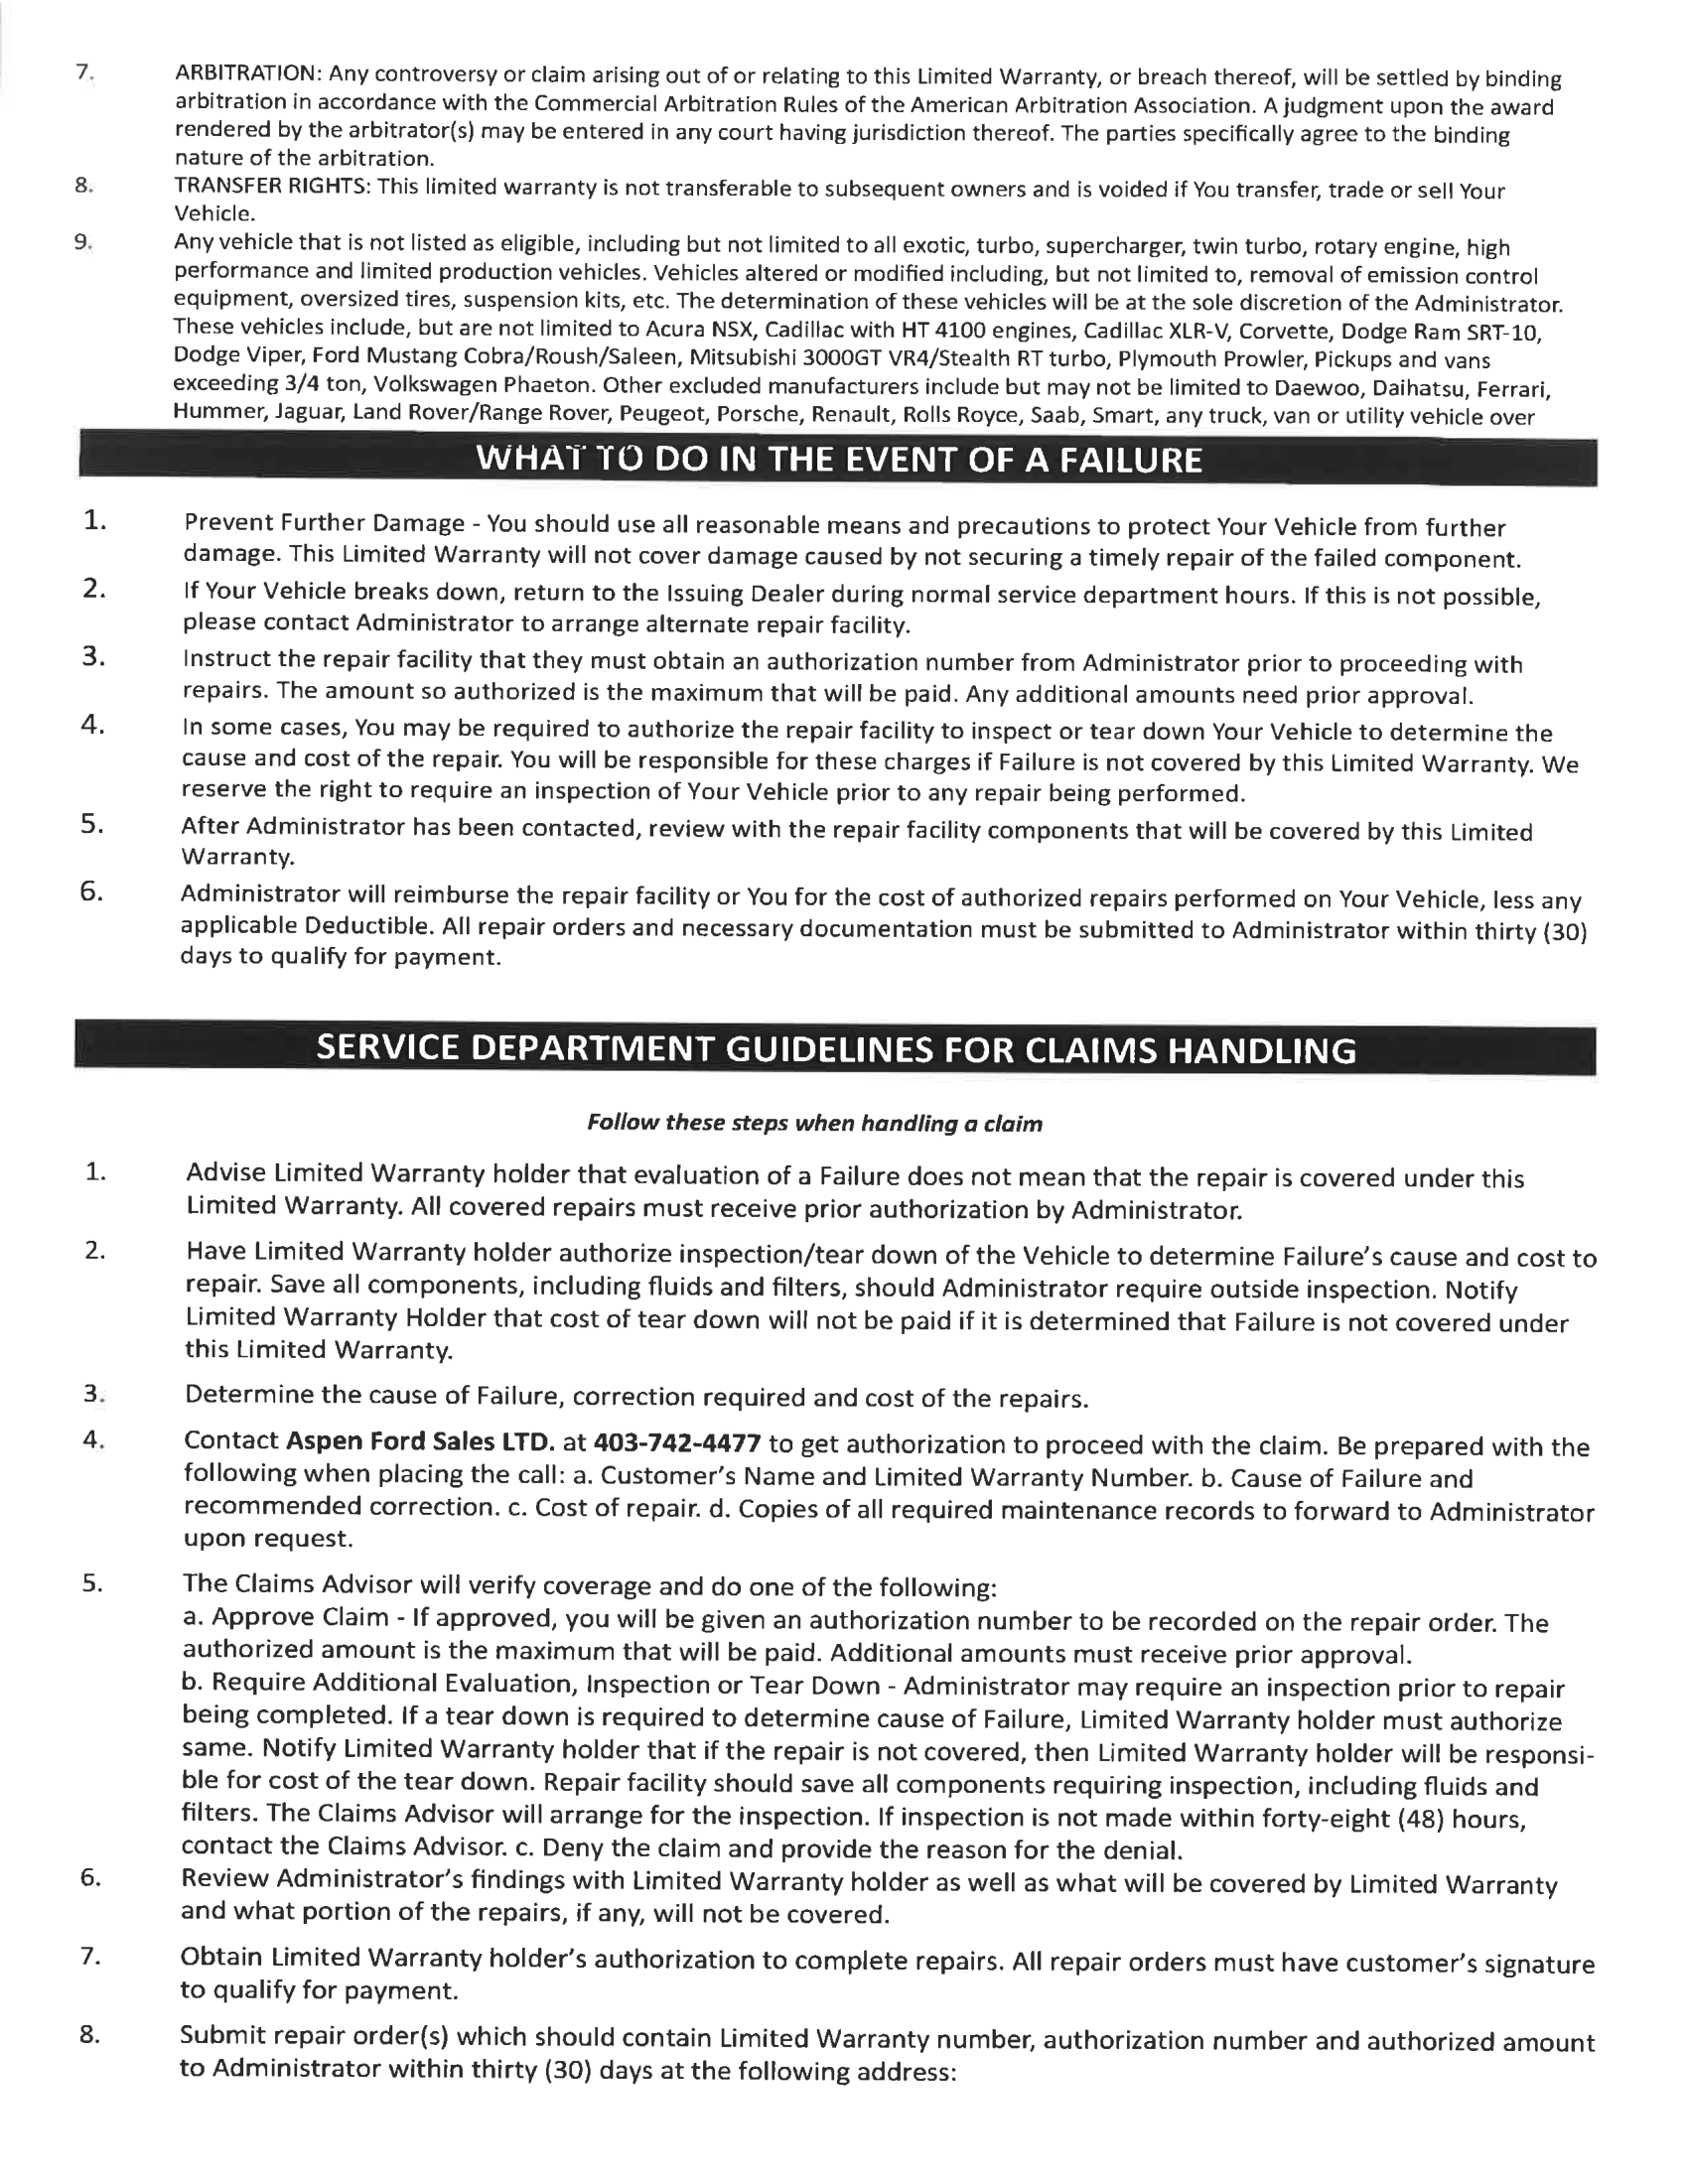 warranty terms and conditions